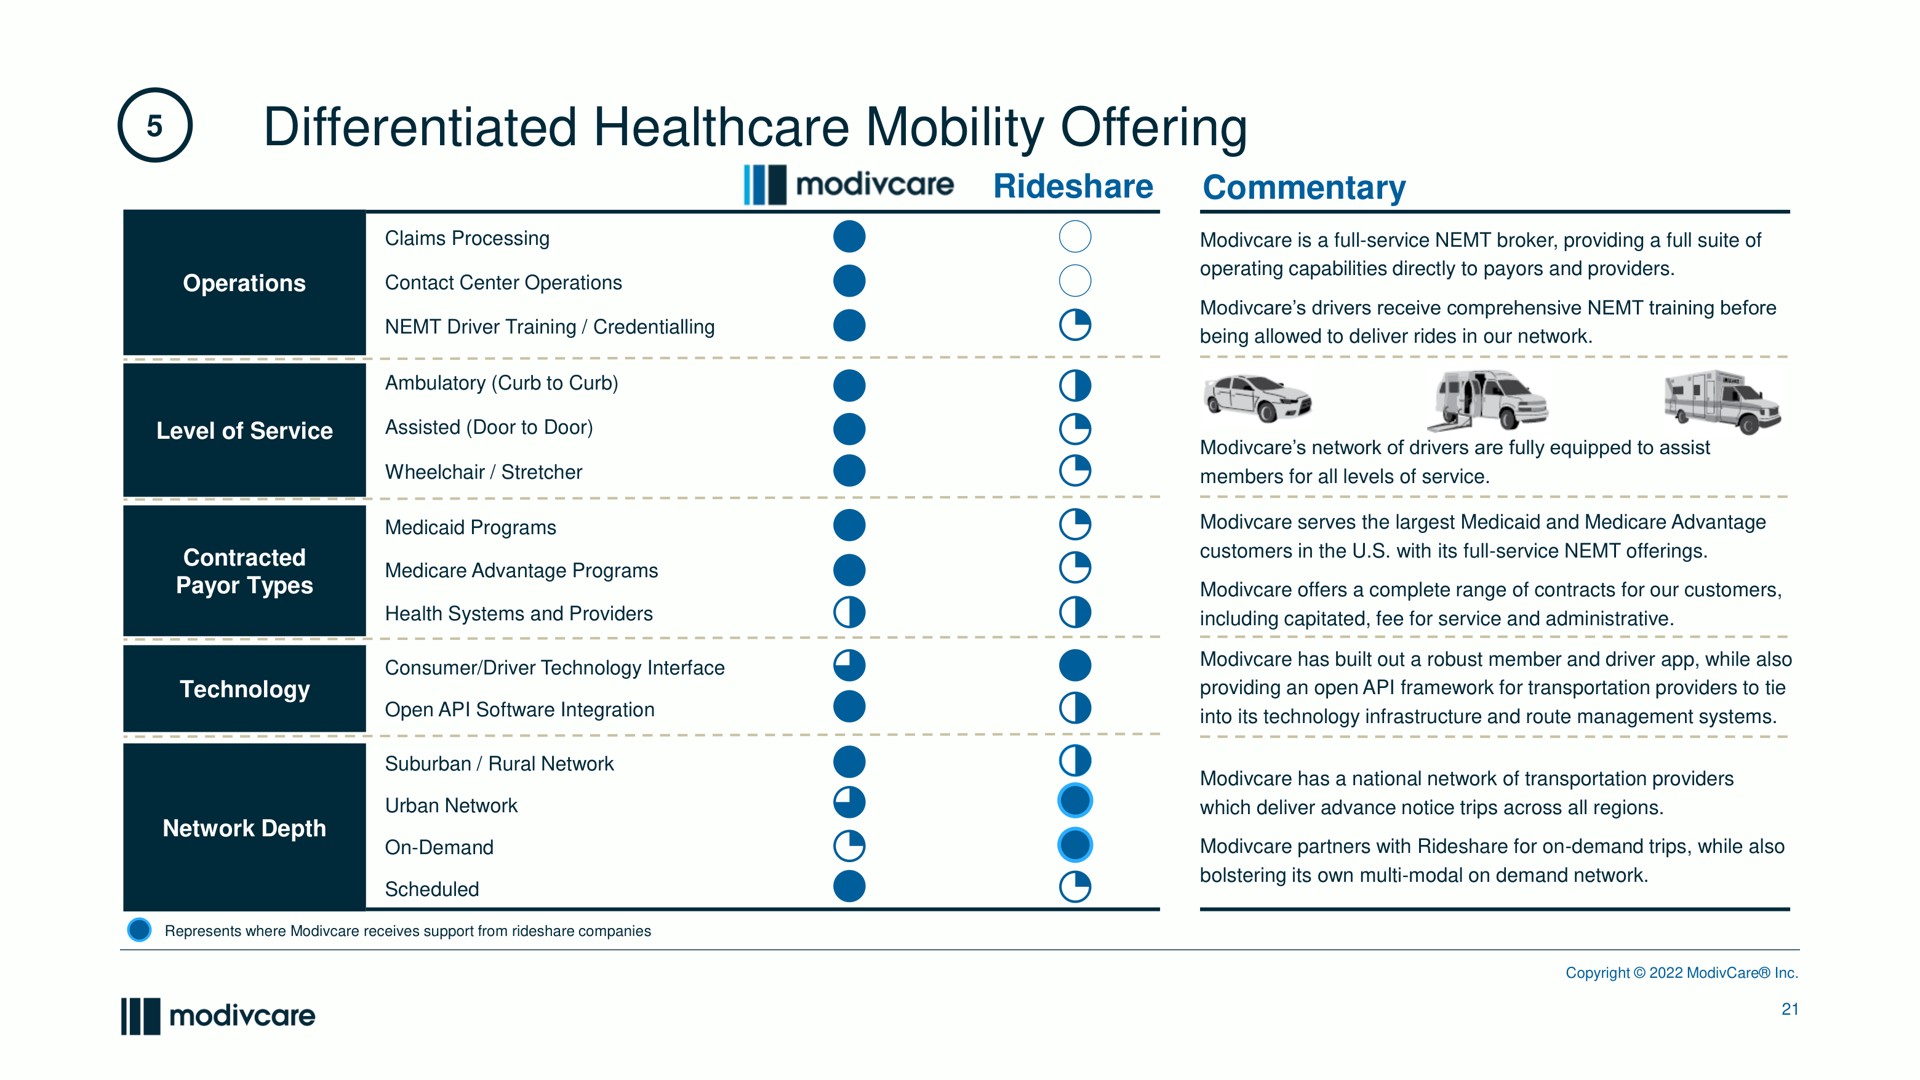 differentiated mobility offering commentary | ModivCare